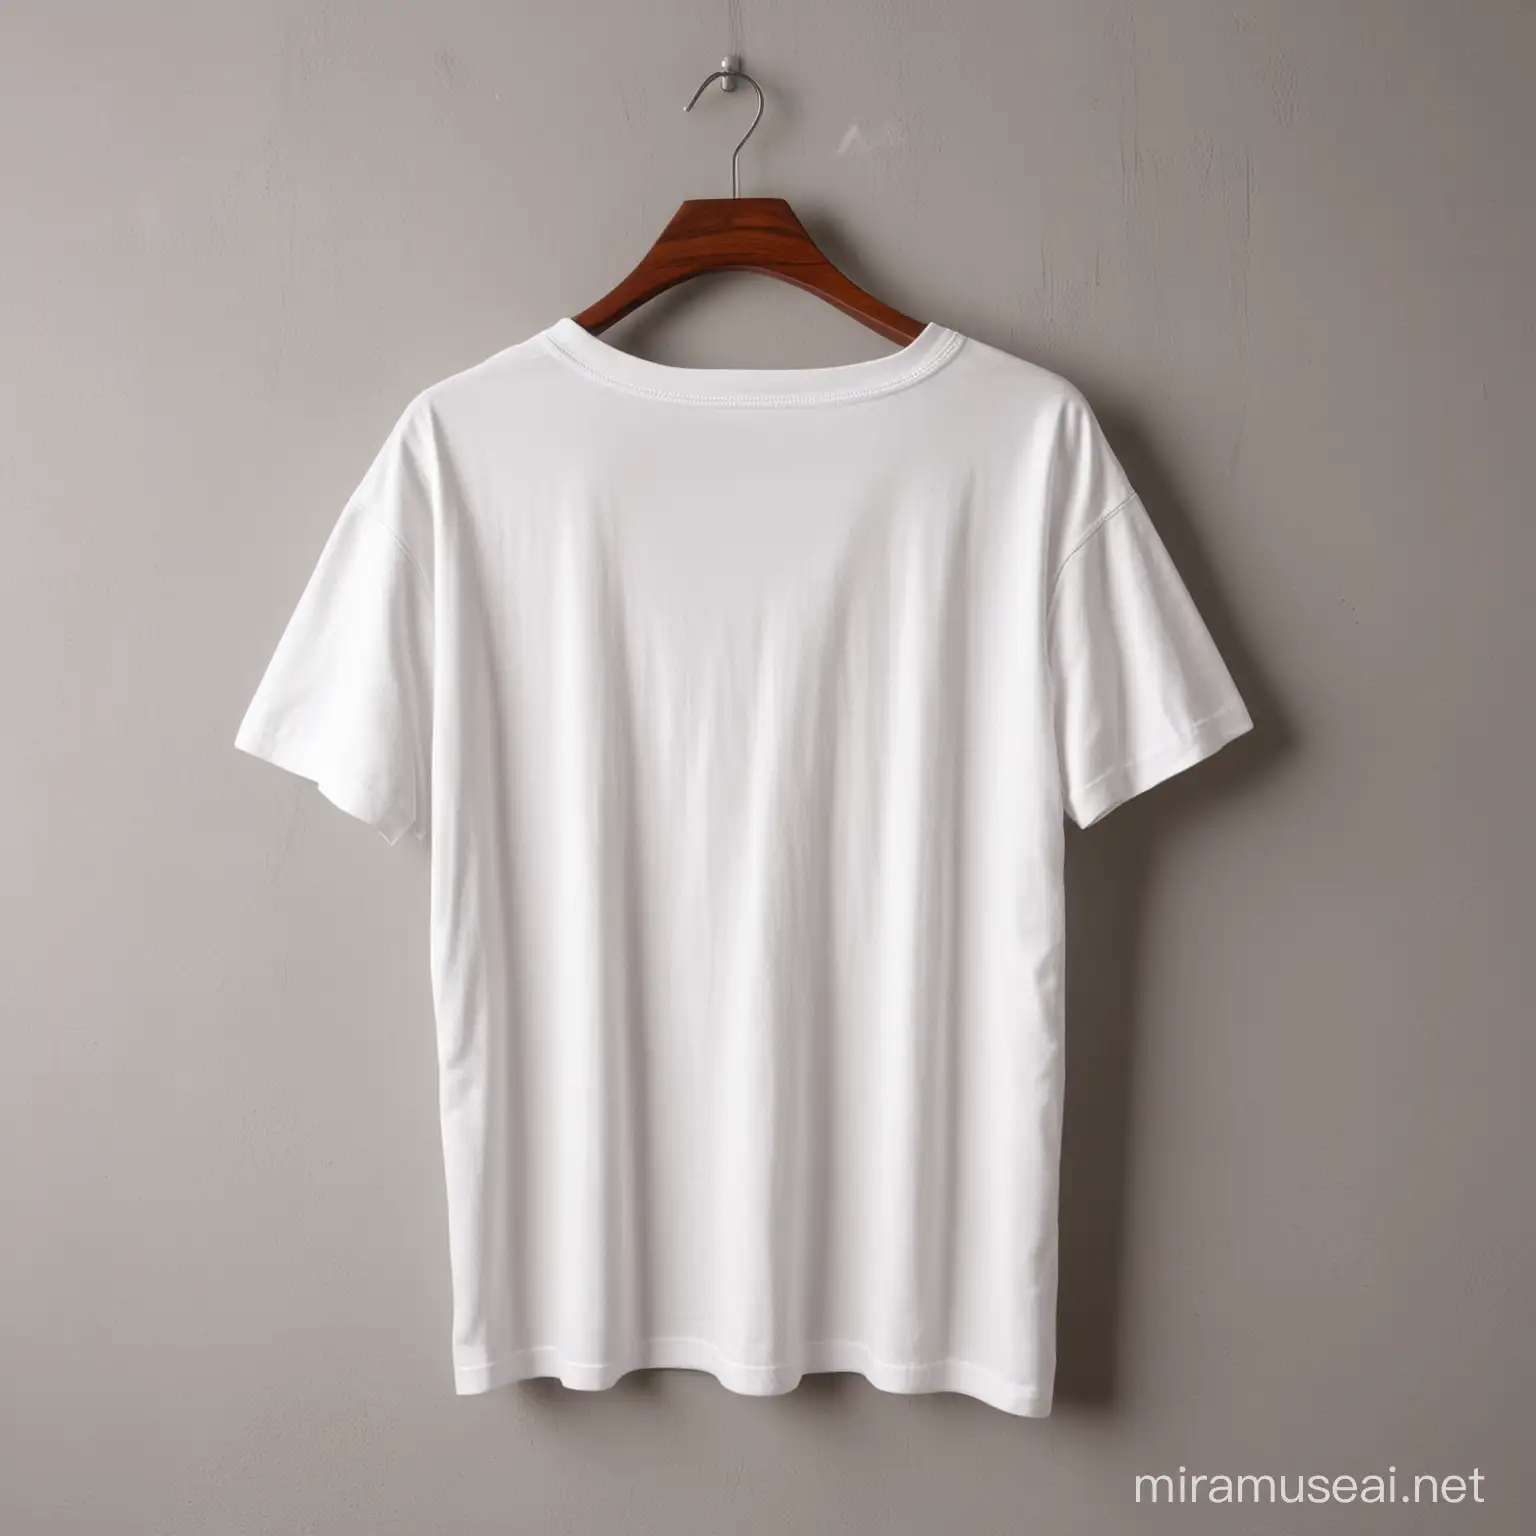 plain white drop shoulder t shirt with back side angle hanging on a wall